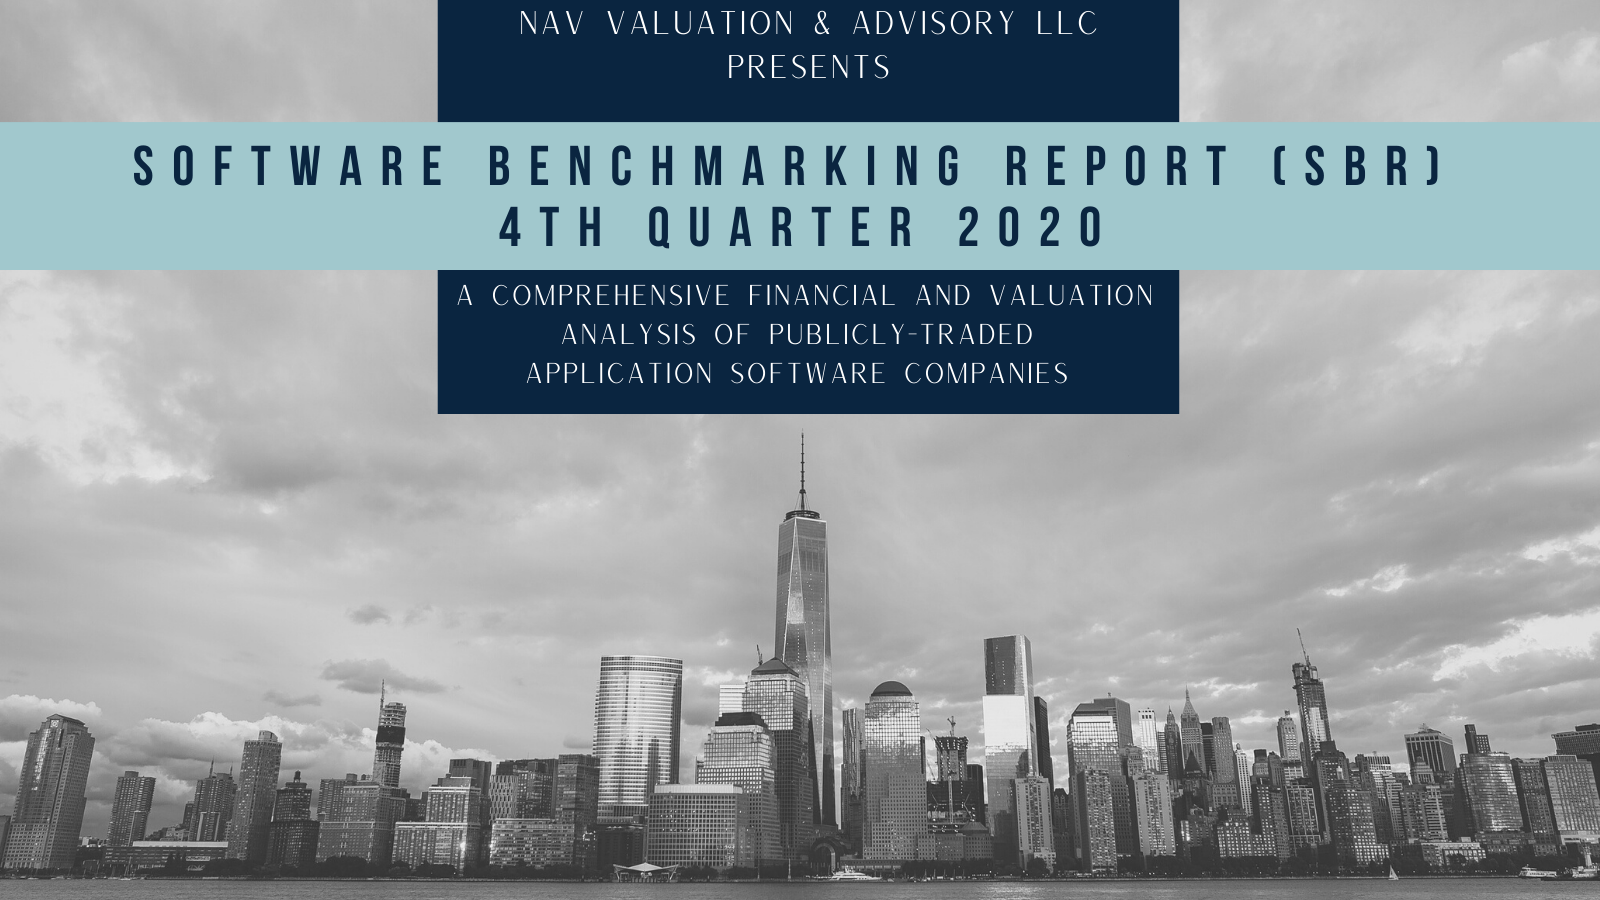 NAV Valuation & Advisory LLC Launches Complimentary Software Benchmarking Report Analyzing Publicly-Traded Application Software Firms in the U.S.